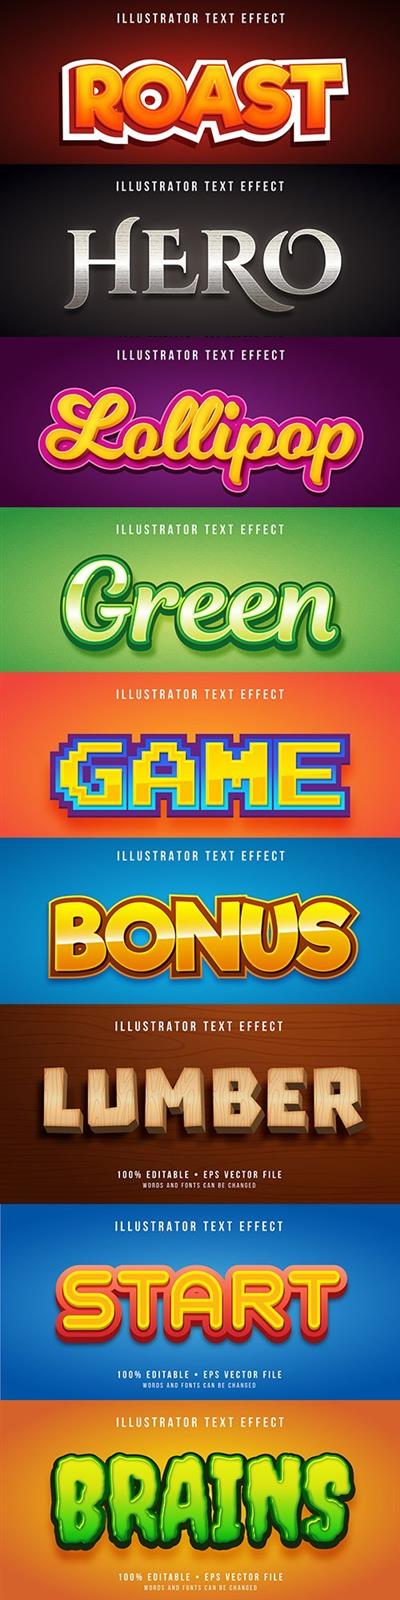 Editable font effect text collection illustration 15